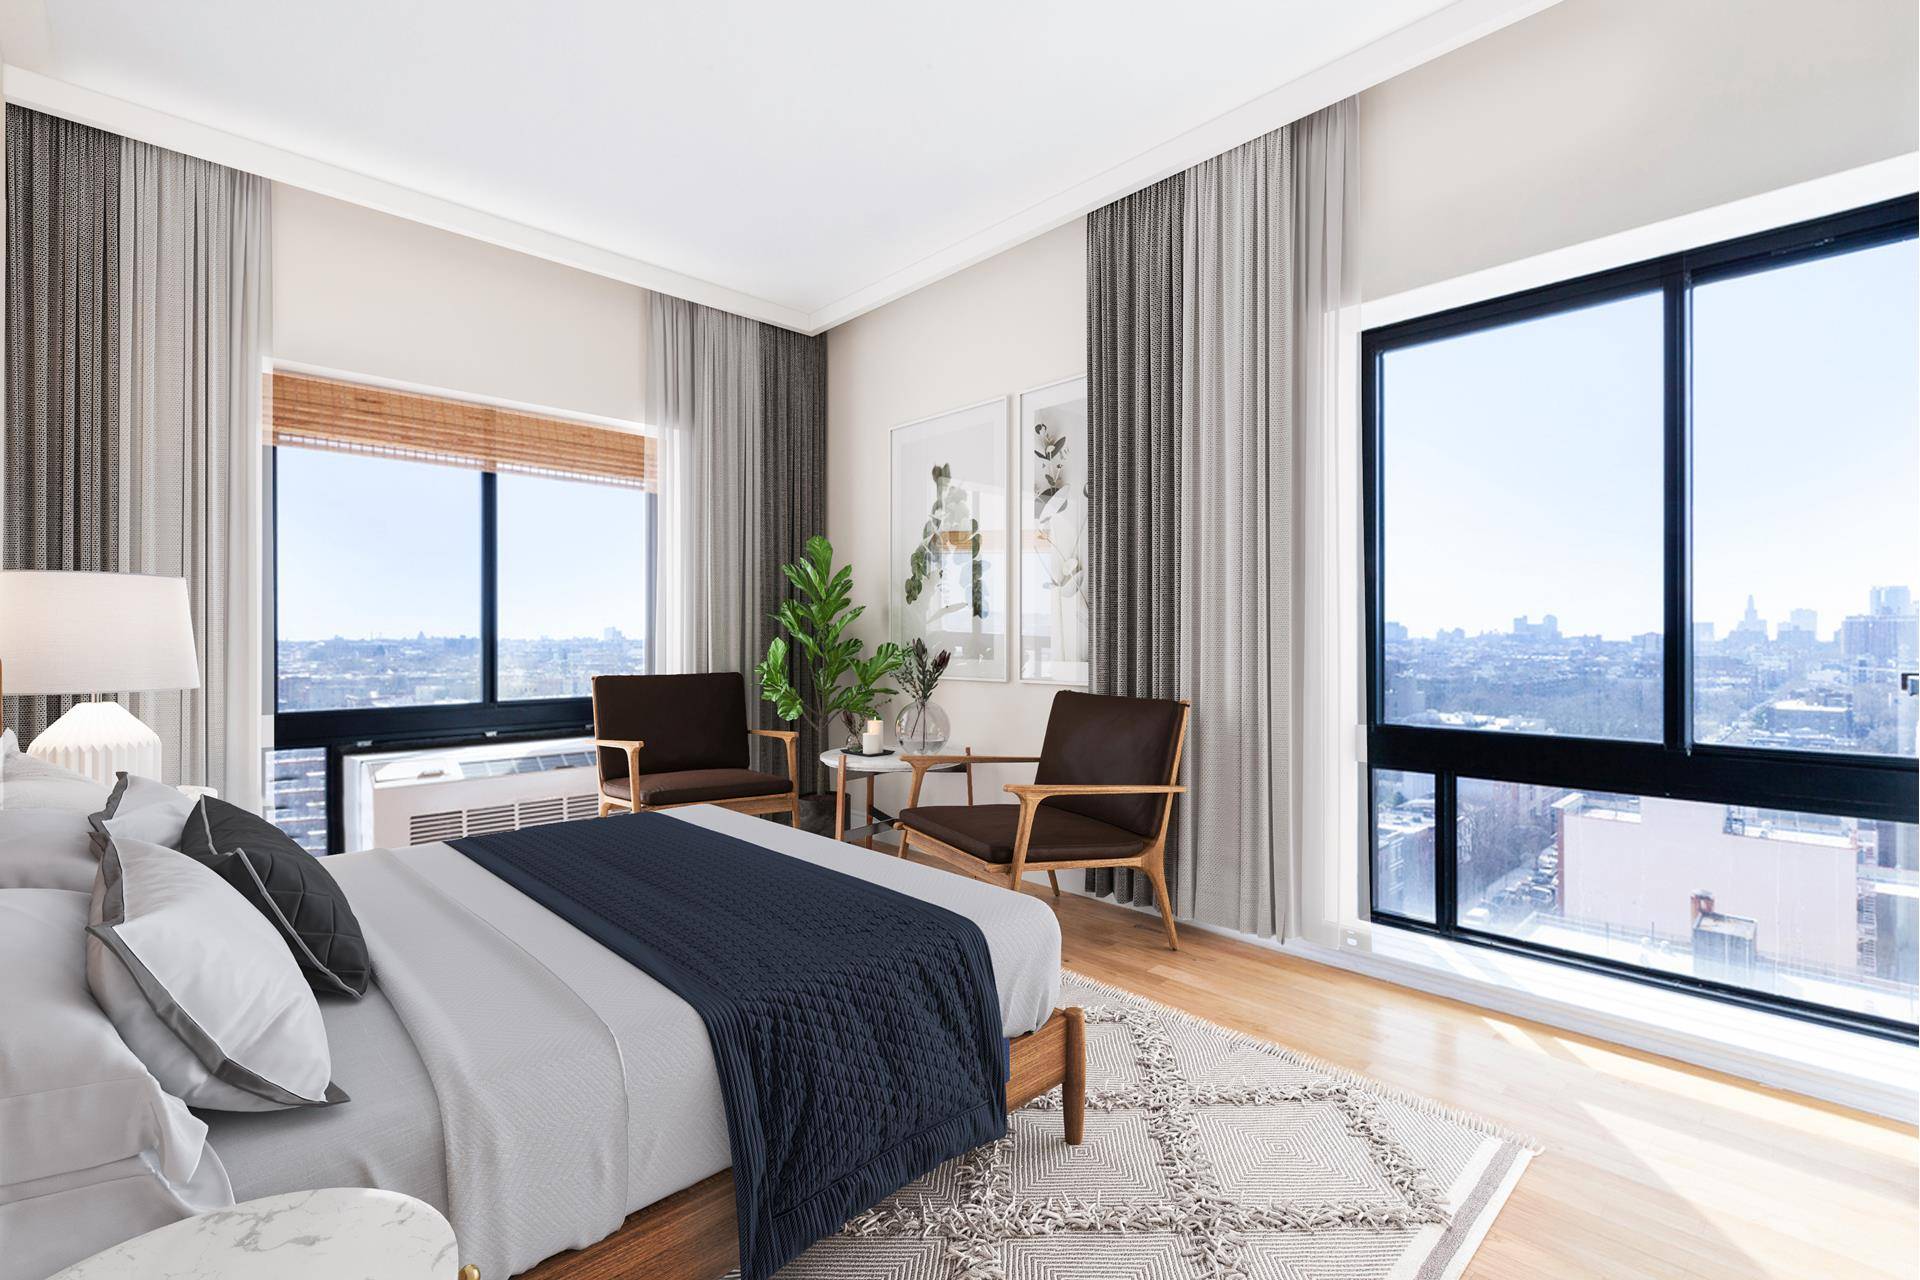 OPEN HOUSE BY APPOINTMENT ONLY Welcome home to The Shelton, located at 775 Lafayette Avenue, situated in the exciting neighborhood of Bedford Stuyvesant, Brooklyn.